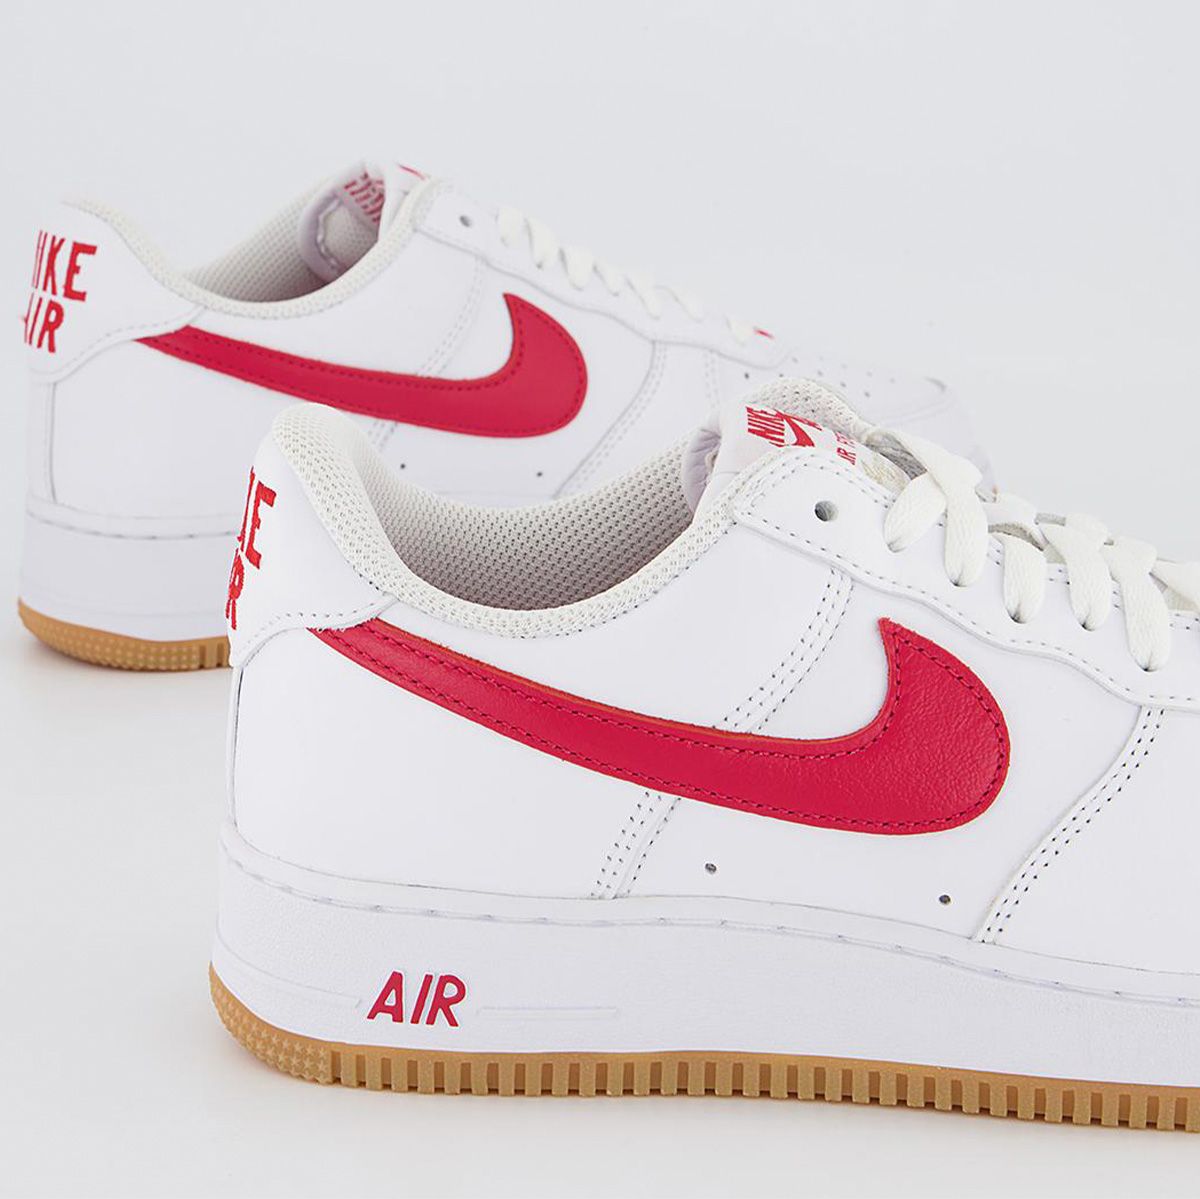 No way Mew Mew Giotto Dibondon Nike Air Force 1 Low “Since '82” Revealed in Three New Colorways | HOUSE OF  HEAT